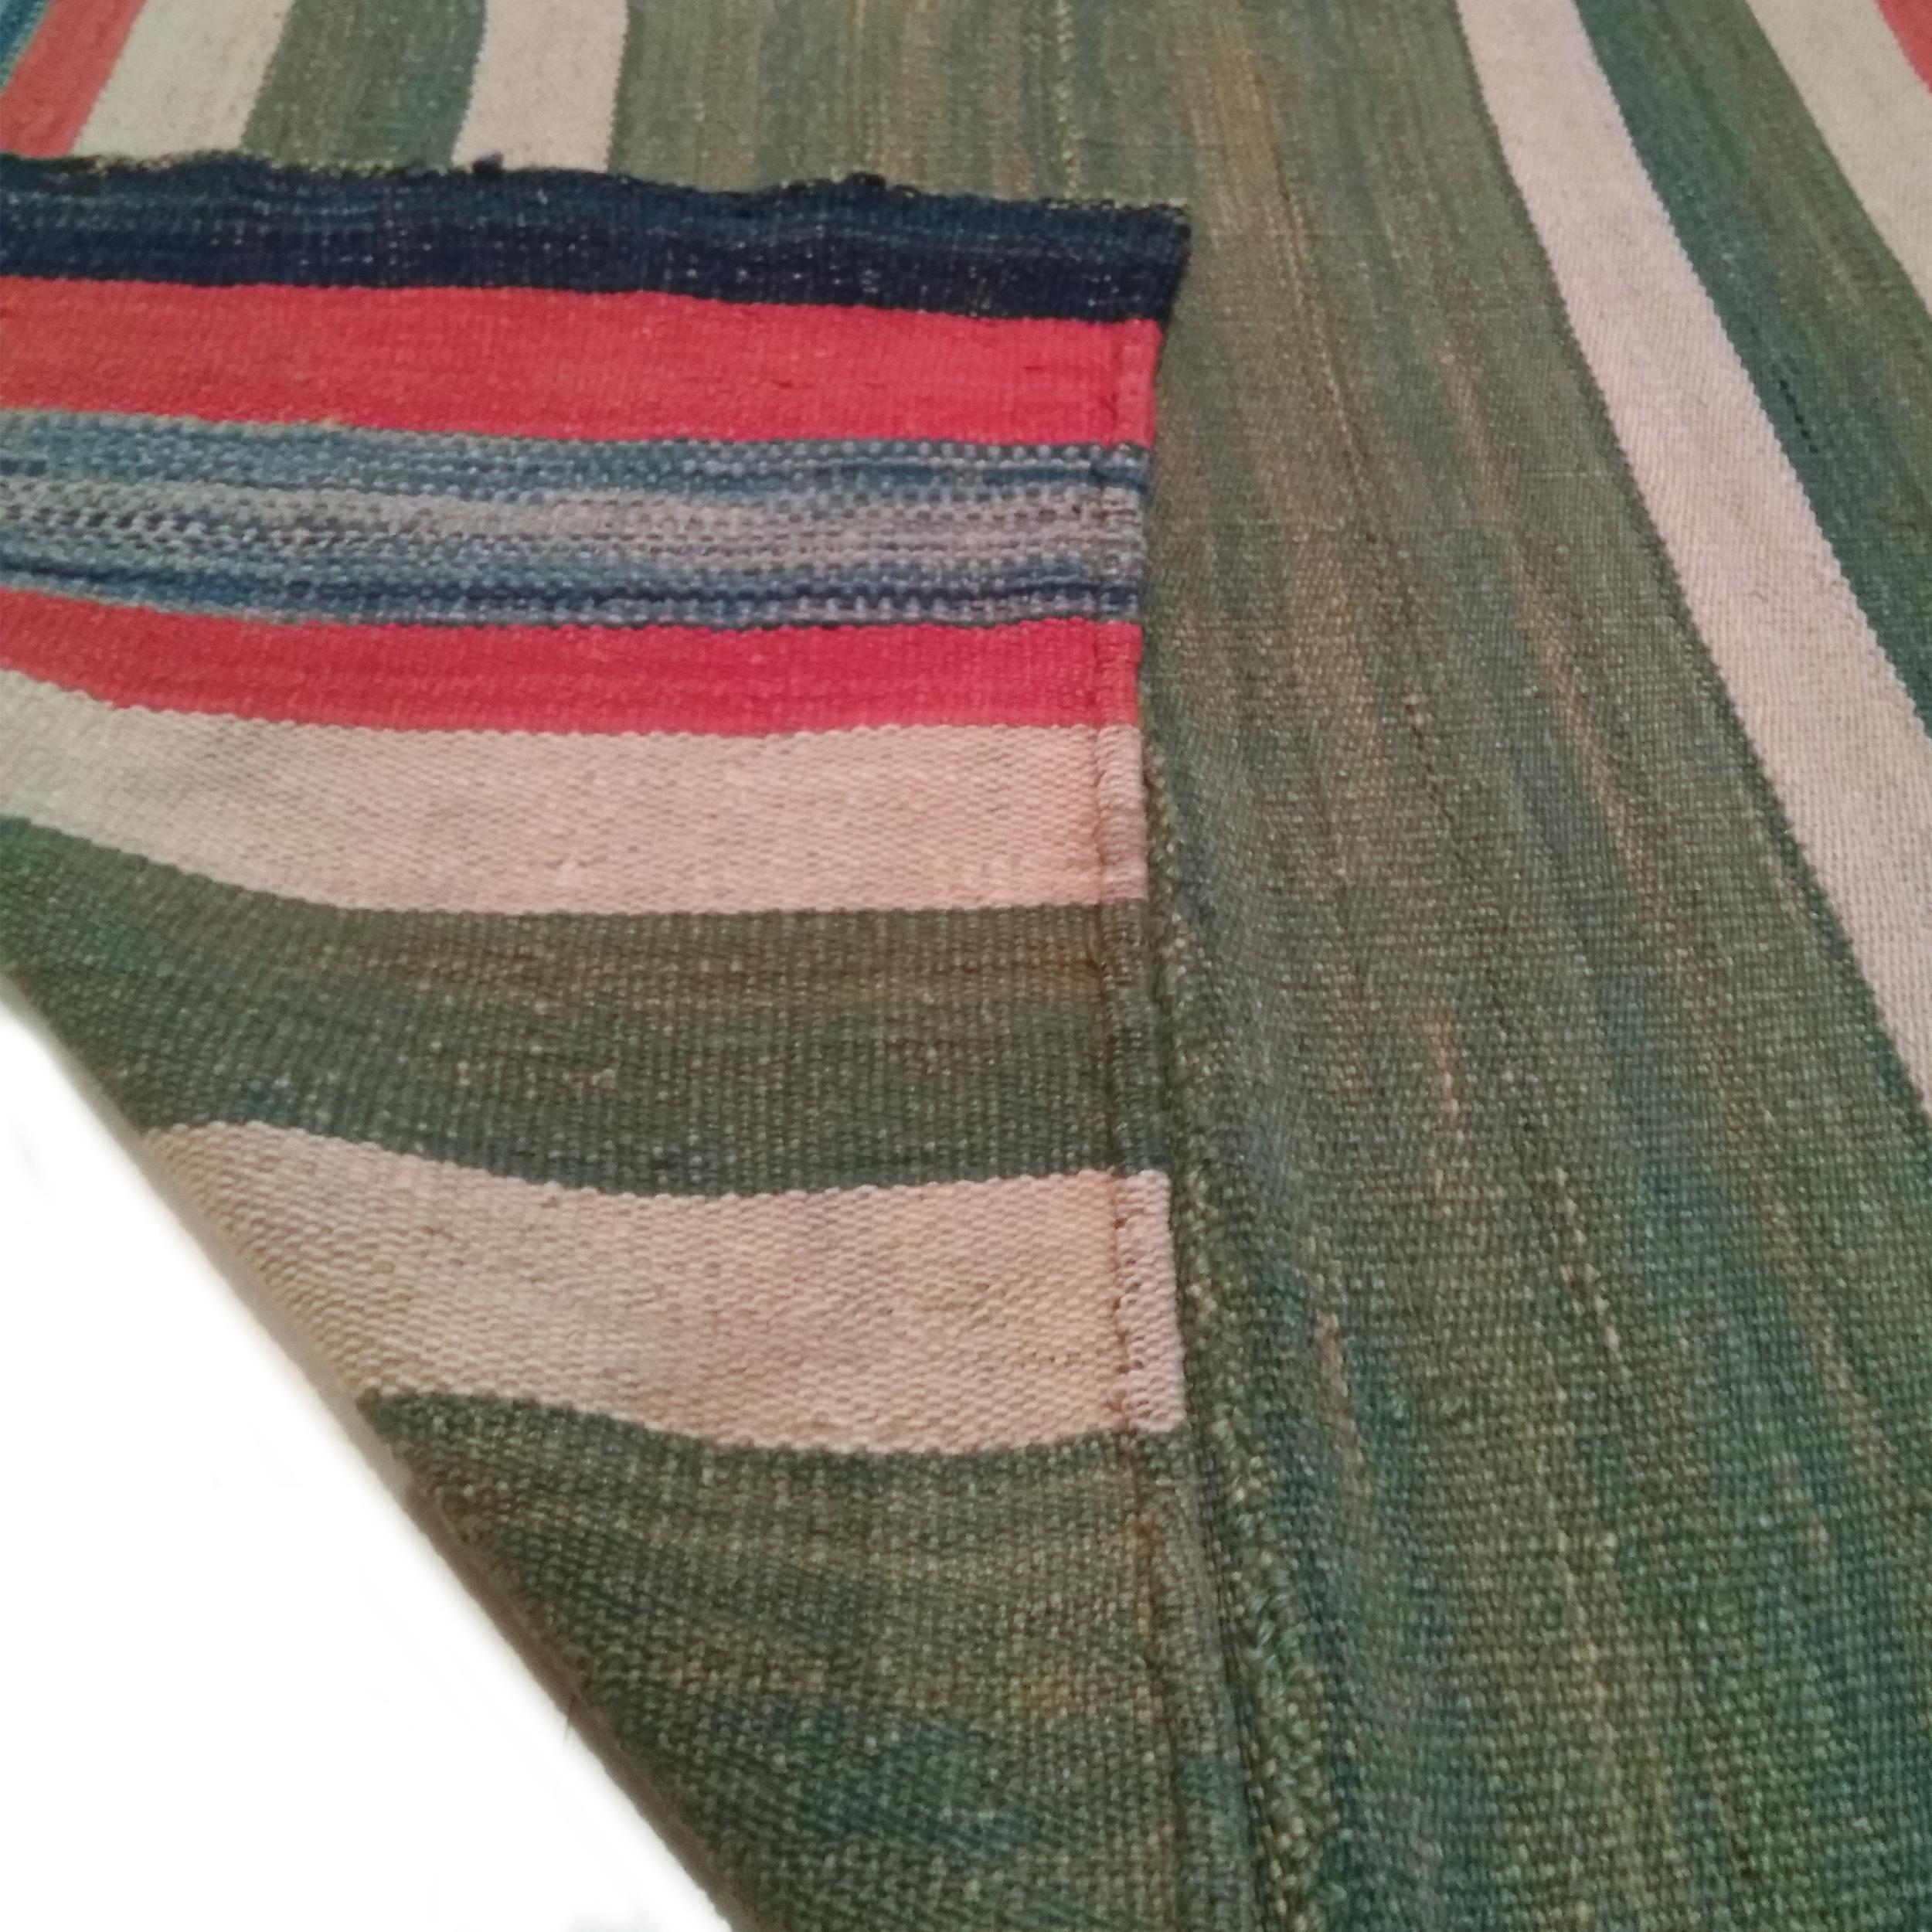 Hand-Woven Antique Tribal Jajim Rug with Vertical Polychrome Stripes on a Green Ground